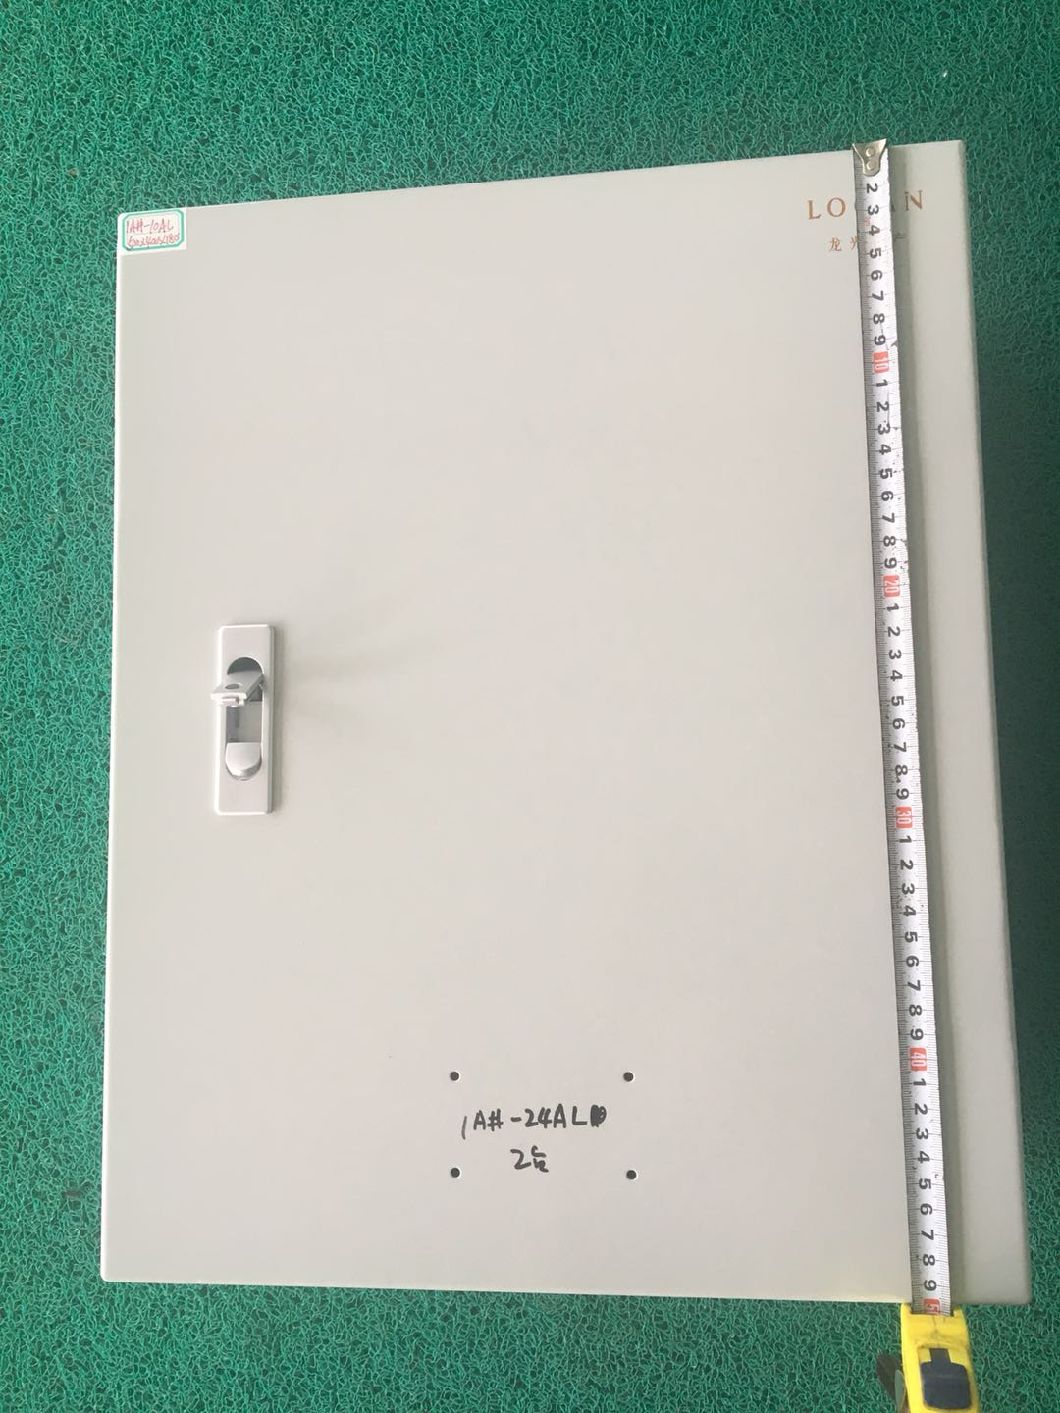 Waterproof Power Supply Stainless Metal Electrical Enclosure Distribution Box